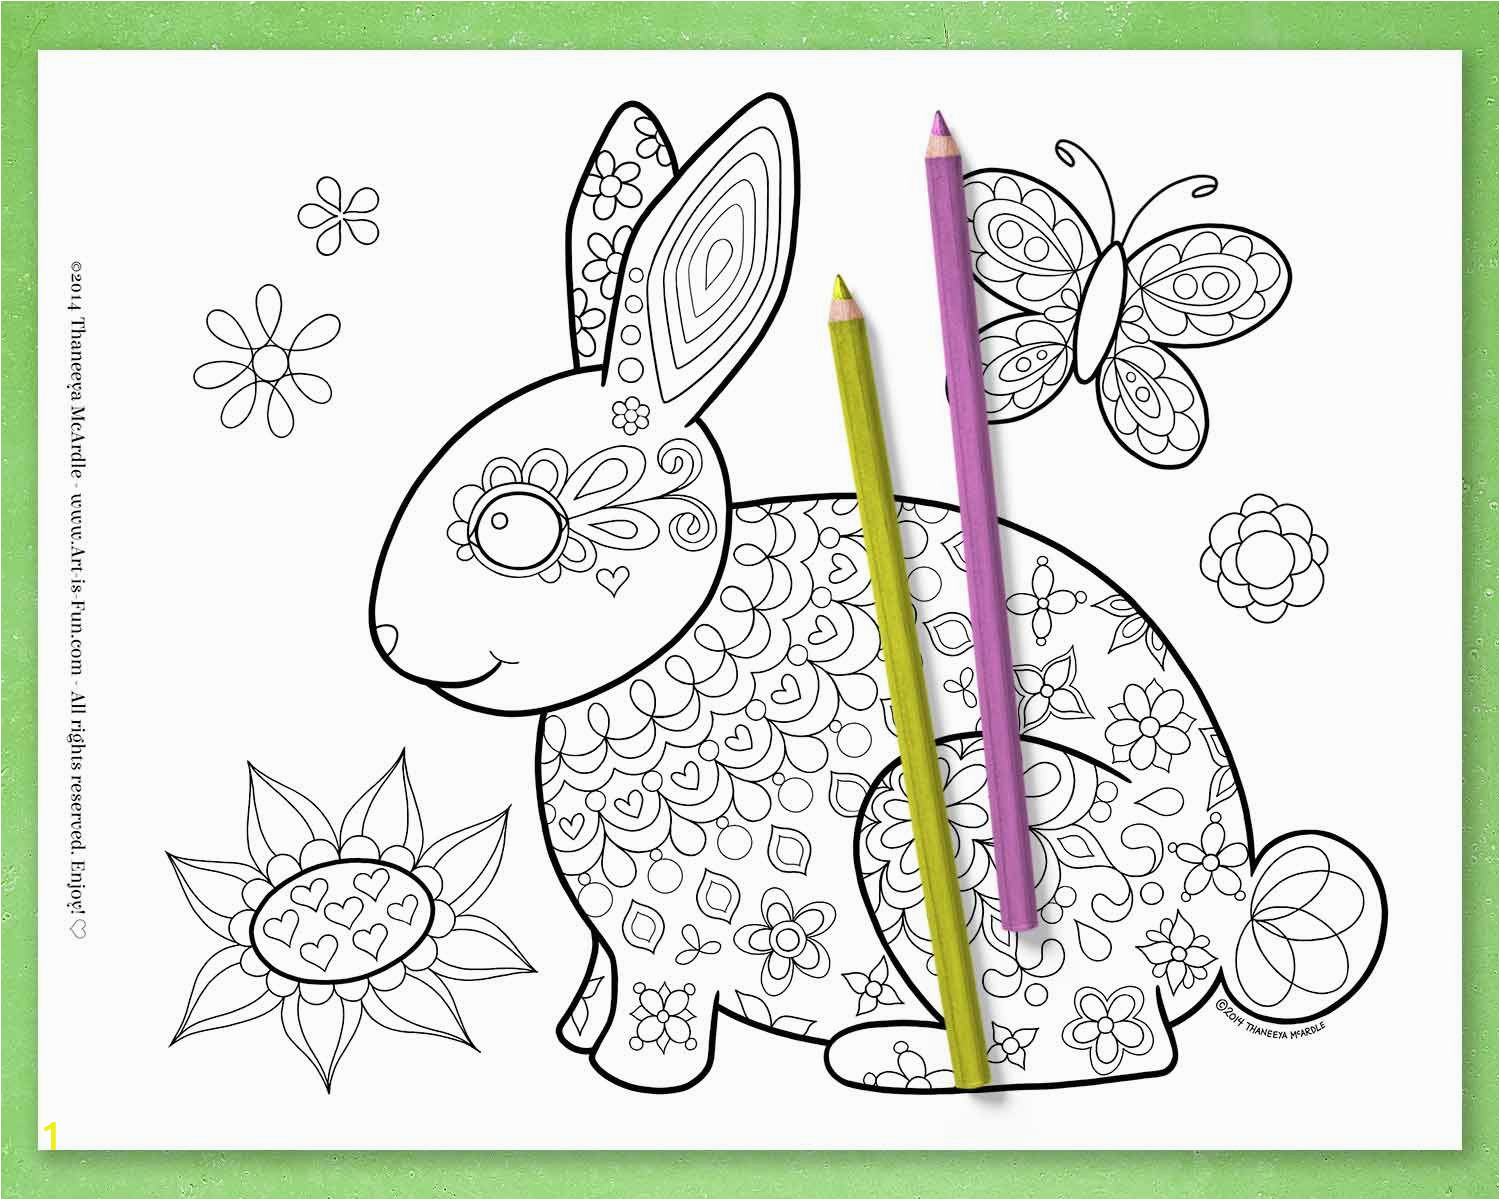 Coloring Pages Of Bunnies Printable Groovy Animals Coloring Pages Fun Printable E Book Of 20